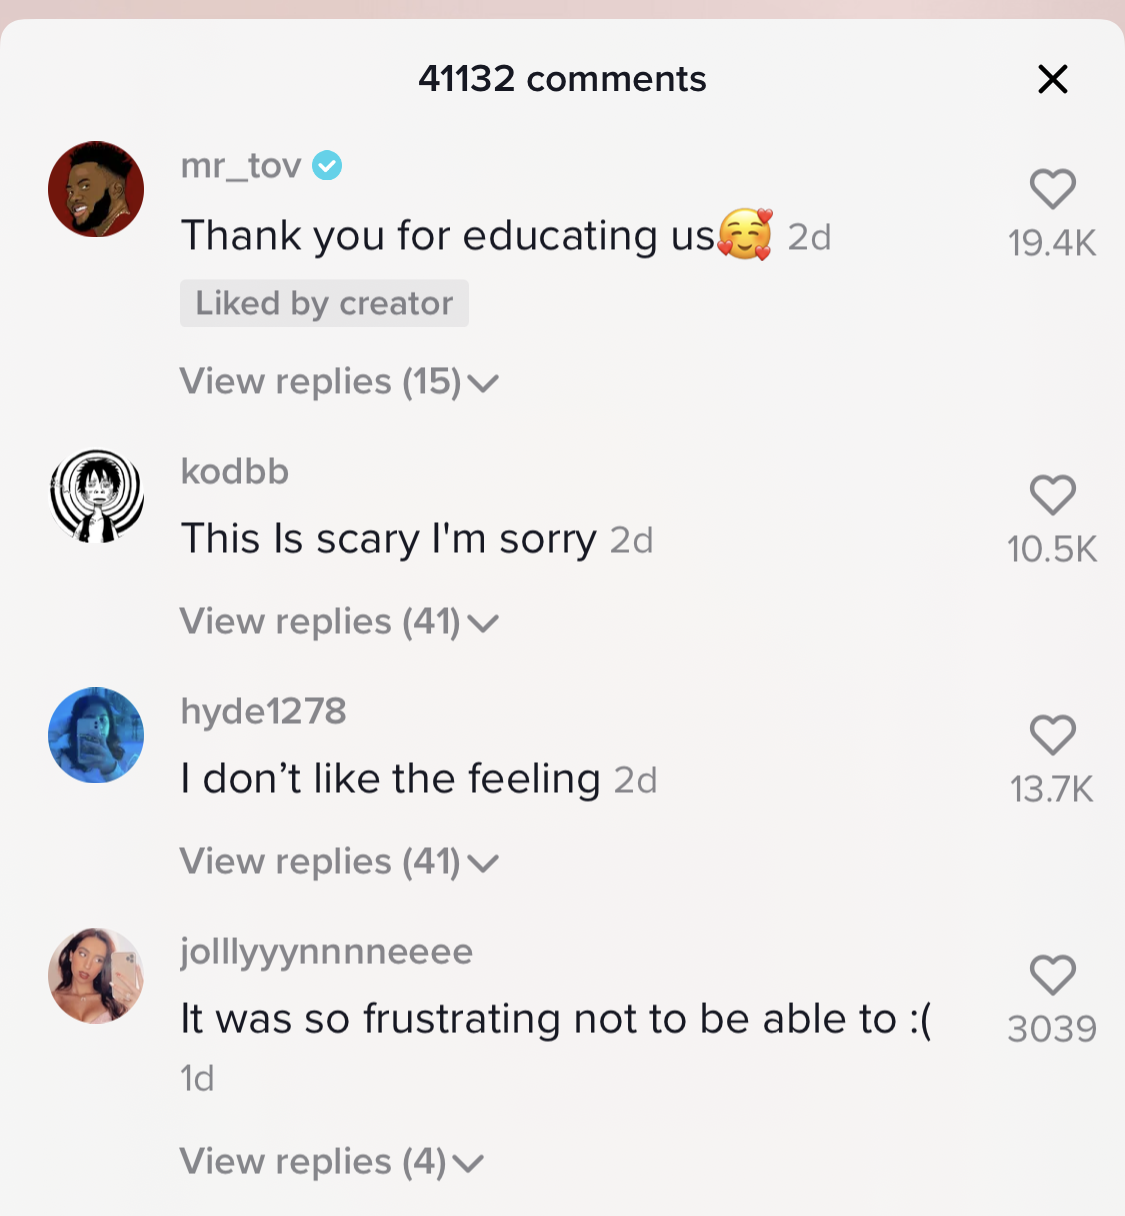 Comments saying &quot;I don&#x27;t like the feeling&quot; and &quot;this is scary, I&#x27;m sorry&quot;